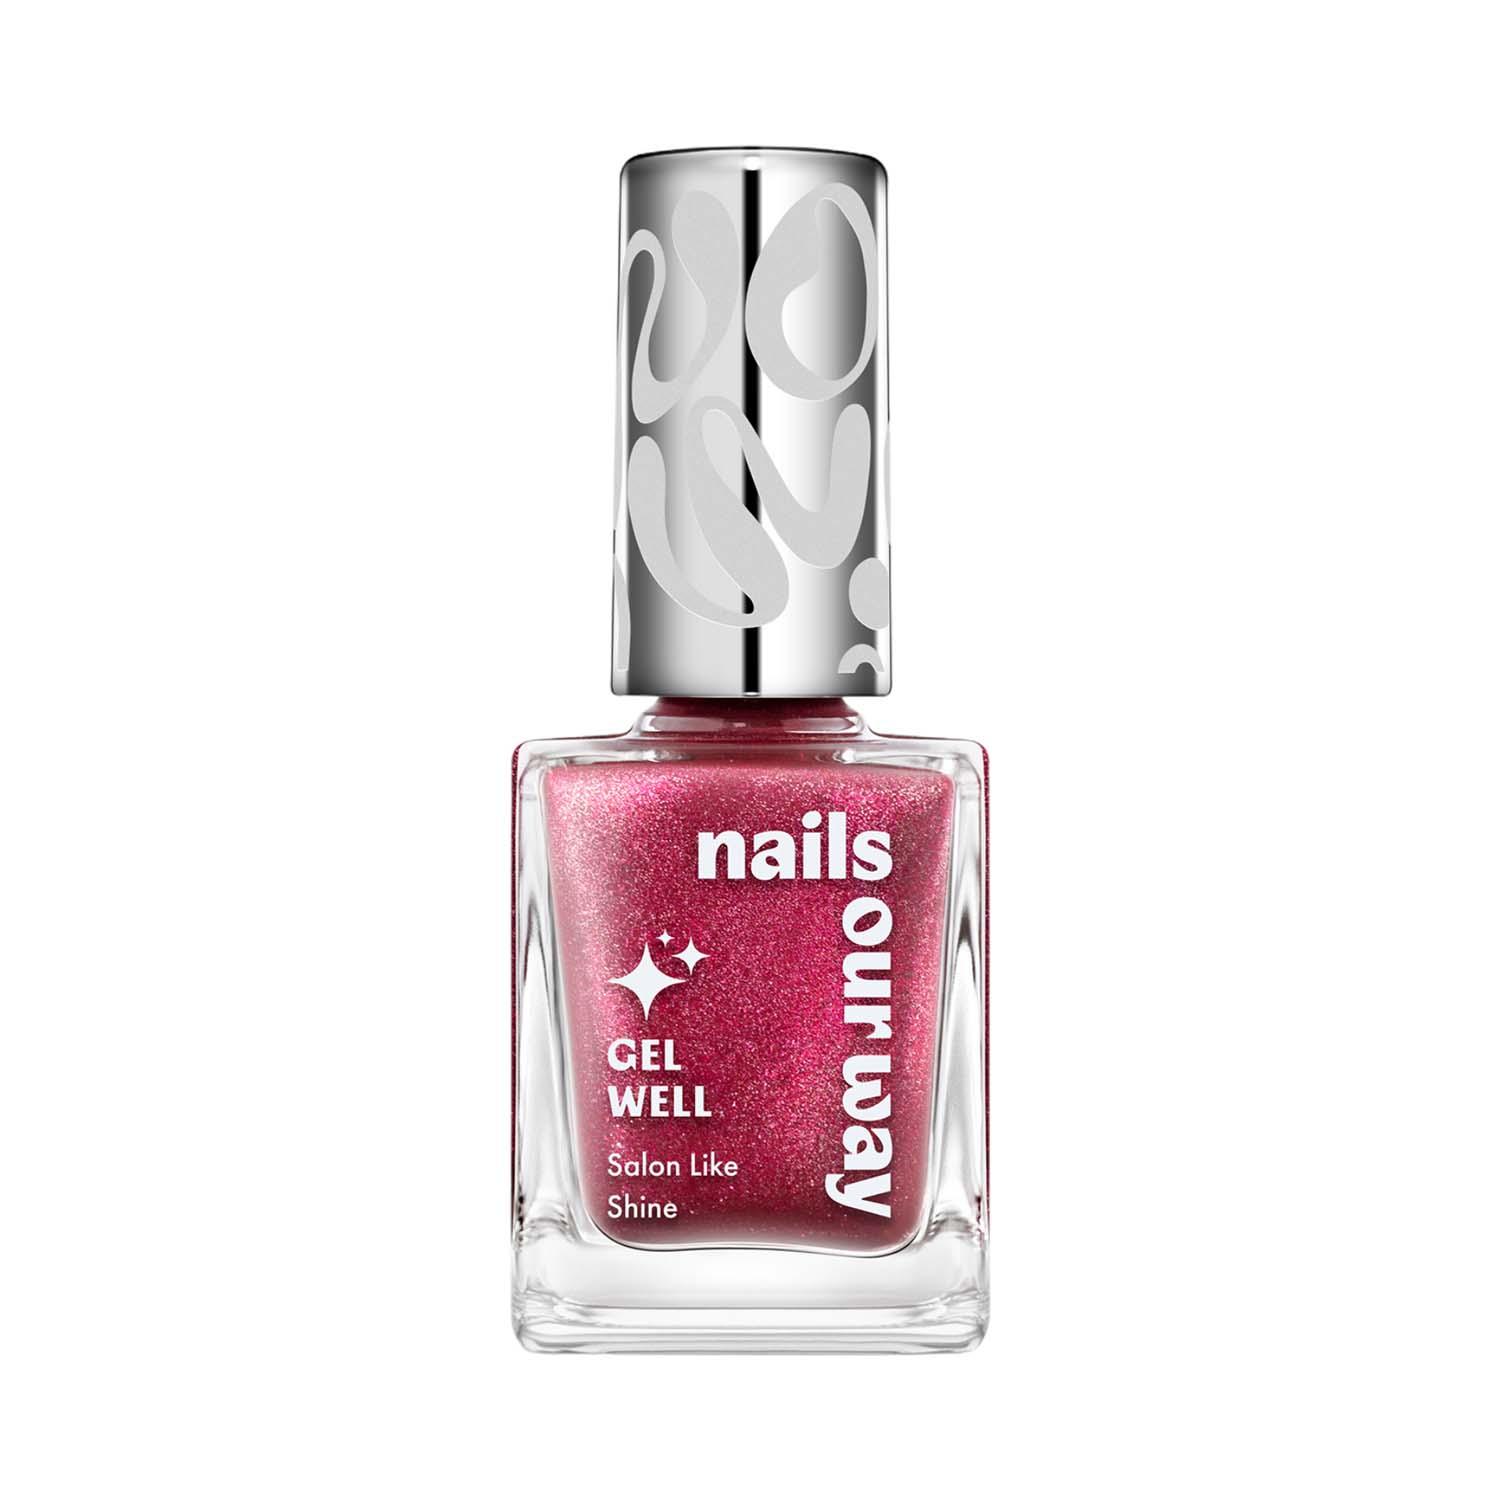 Nails Our Way Gel Well Nail Enamel - 218 Upbeat (10 ml)